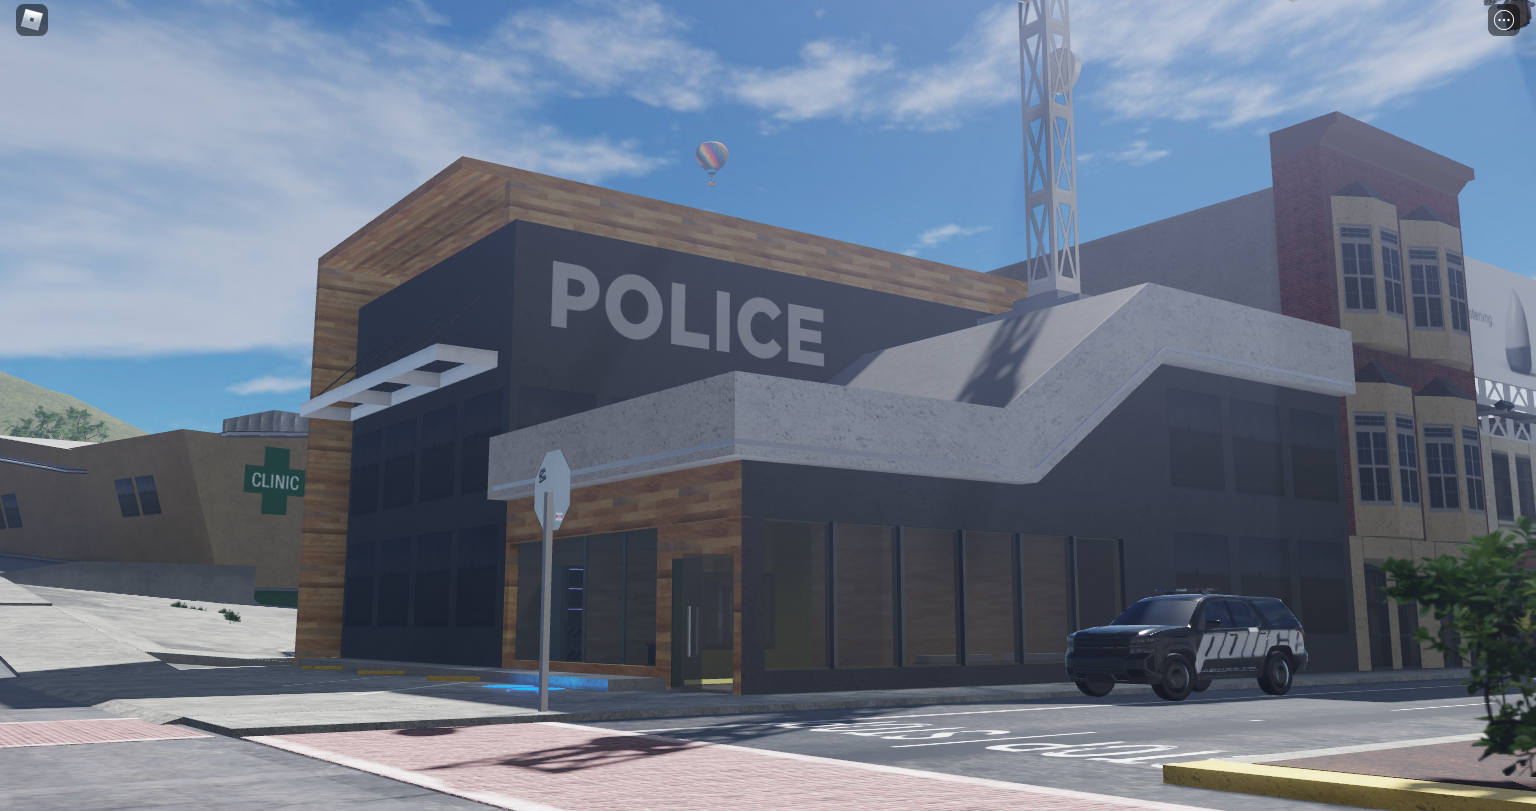 Roblox (Update) Pacifico 2: Playground Town By Urban Sector and Tampa,  Florida [V1] By (FHP) Florida Highway Patrol. Ambulance Paramedic and  Hospital 🚑🏥🚶‍♂️🚶‍♀️, (Update) Pacifico 2: Playground Town By  UrbanSector